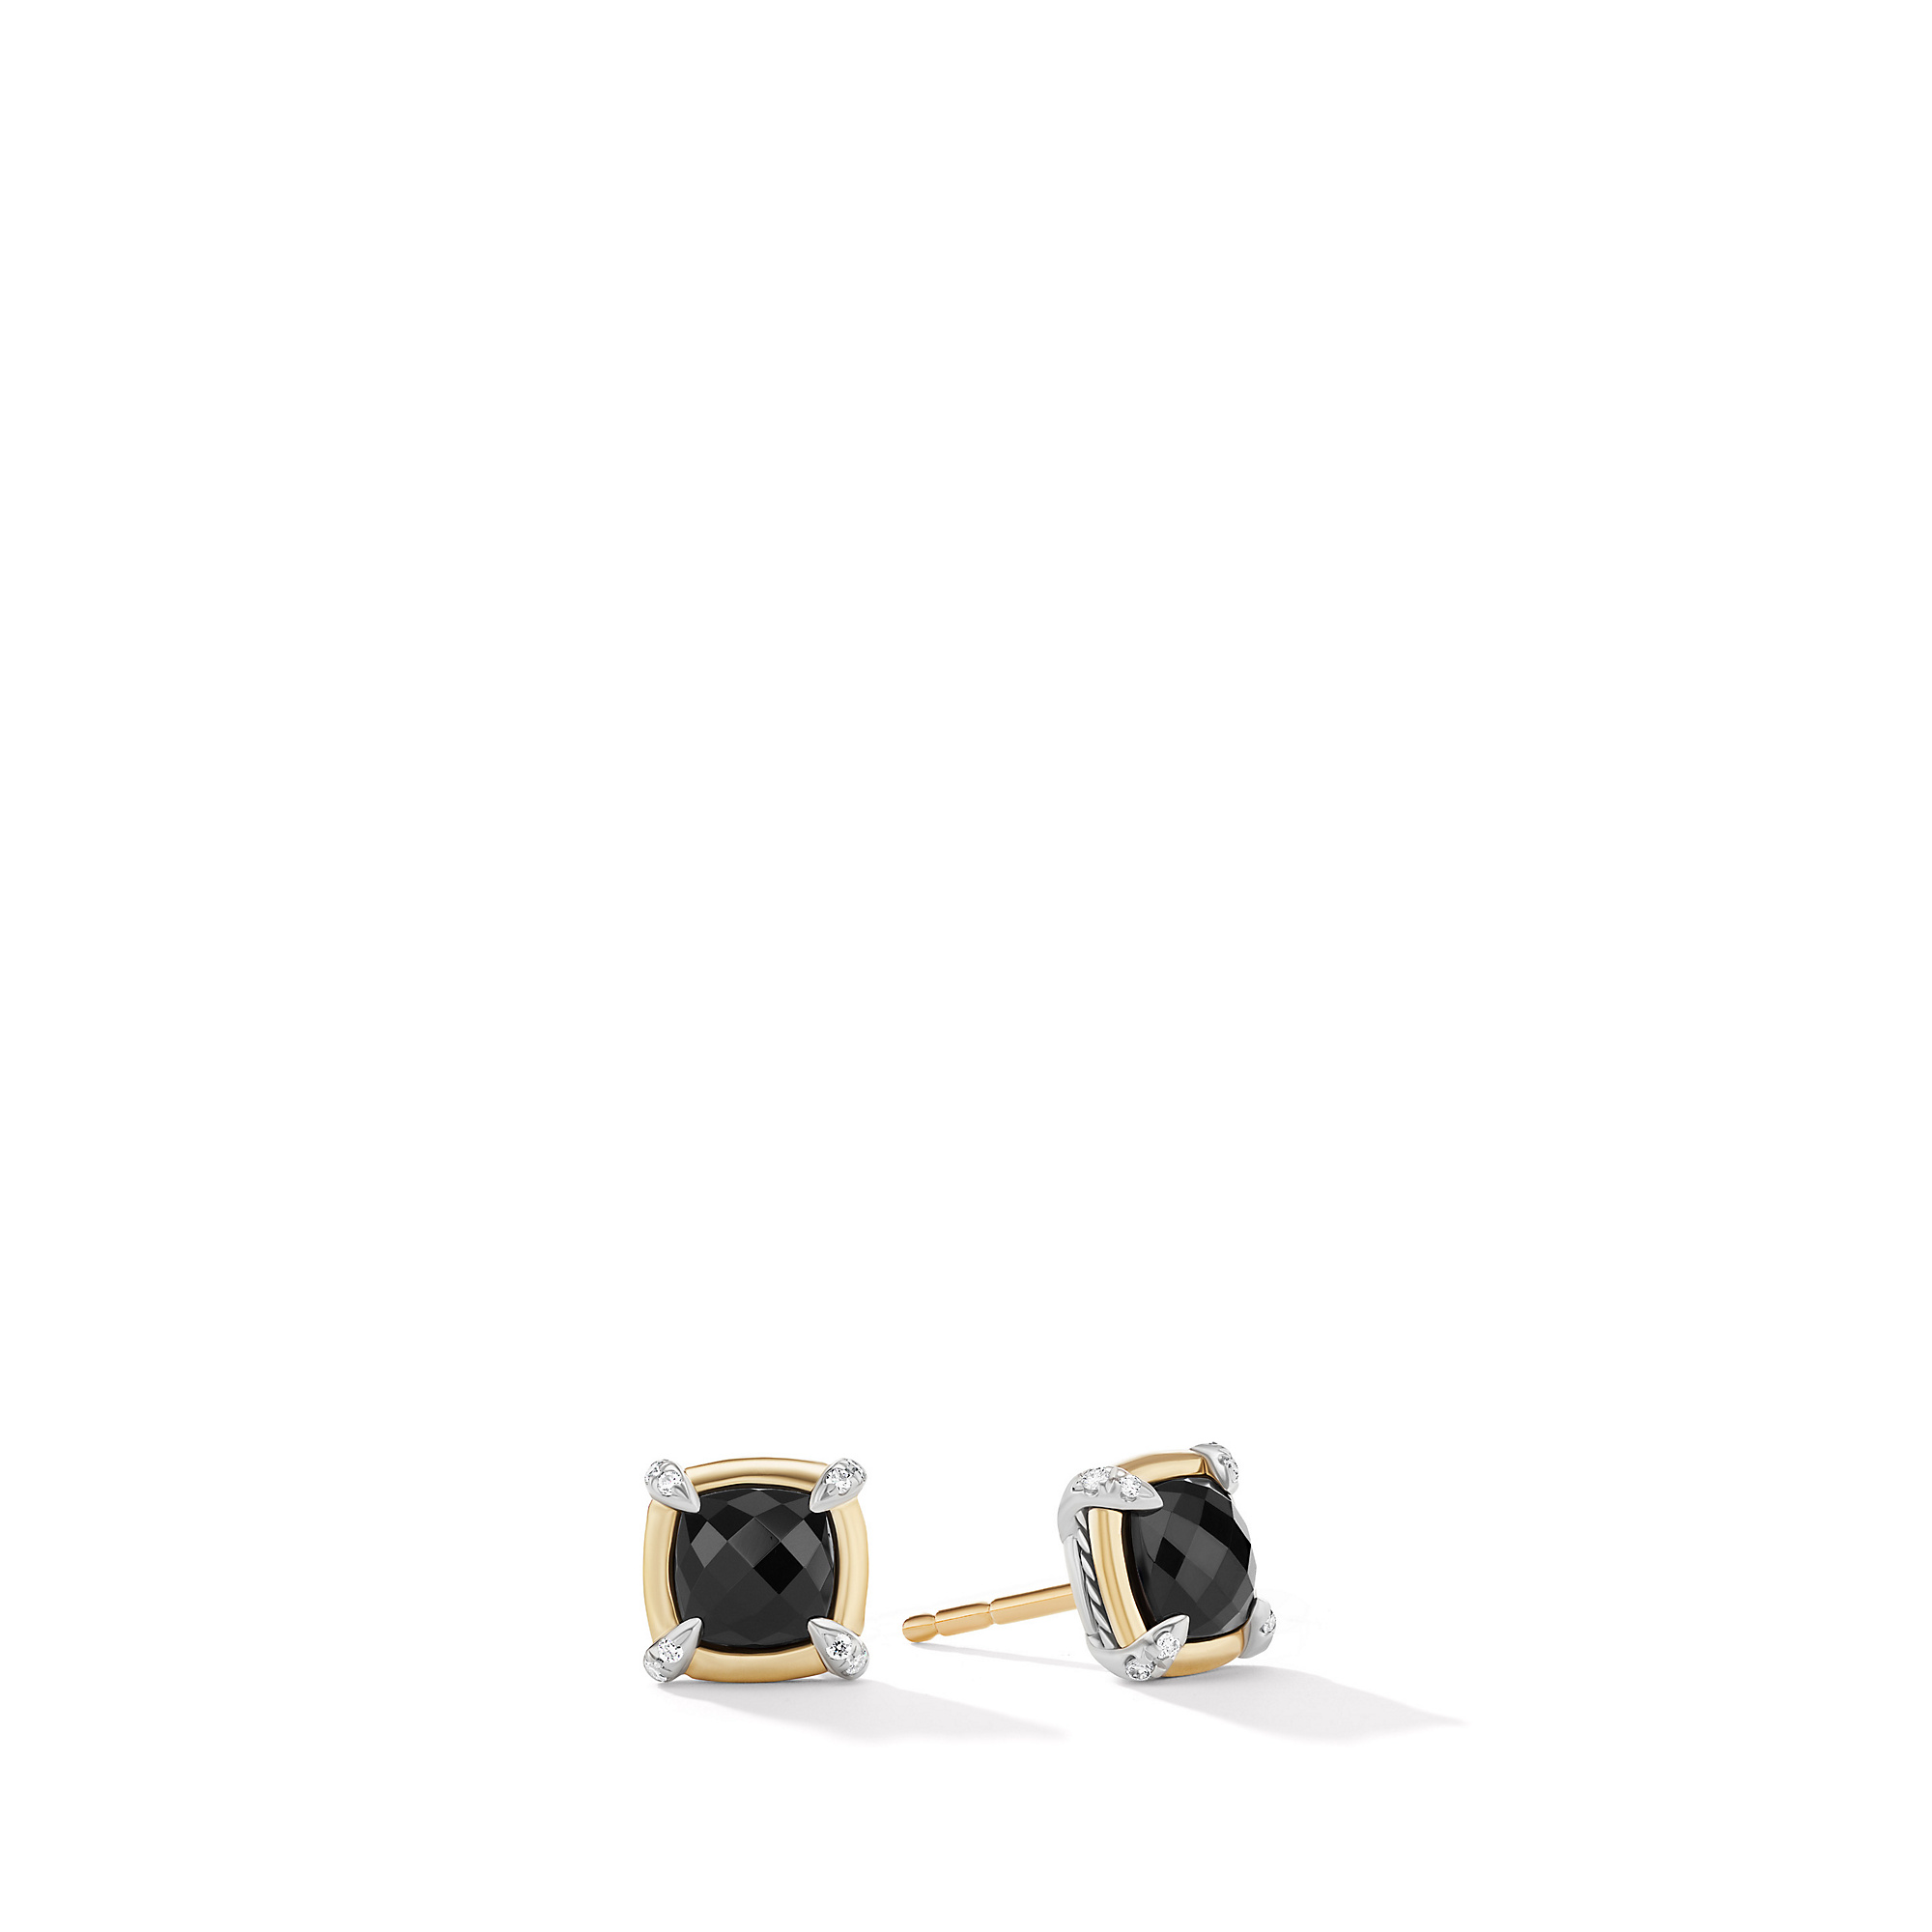 Petite Chatelaine® Stud Earrings in Sterling Silver with 18K Yellow Gold, Black Onyx and Diamonds, 5mm